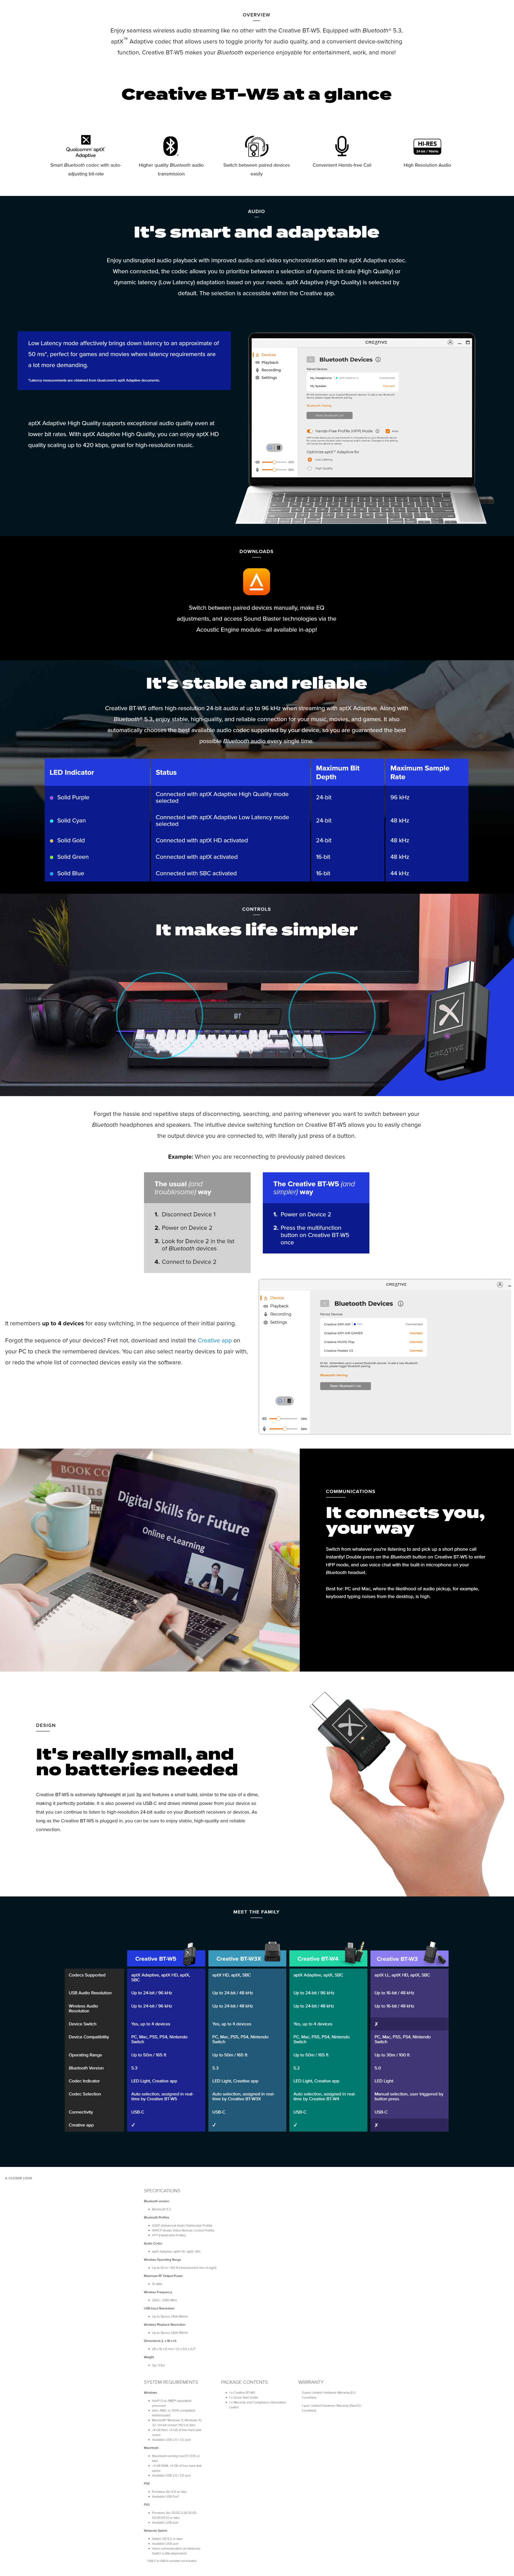 A large marketing image providing additional information about the product Creative BT-W5 USB Bluetooth Transmitter - Additional alt info not provided